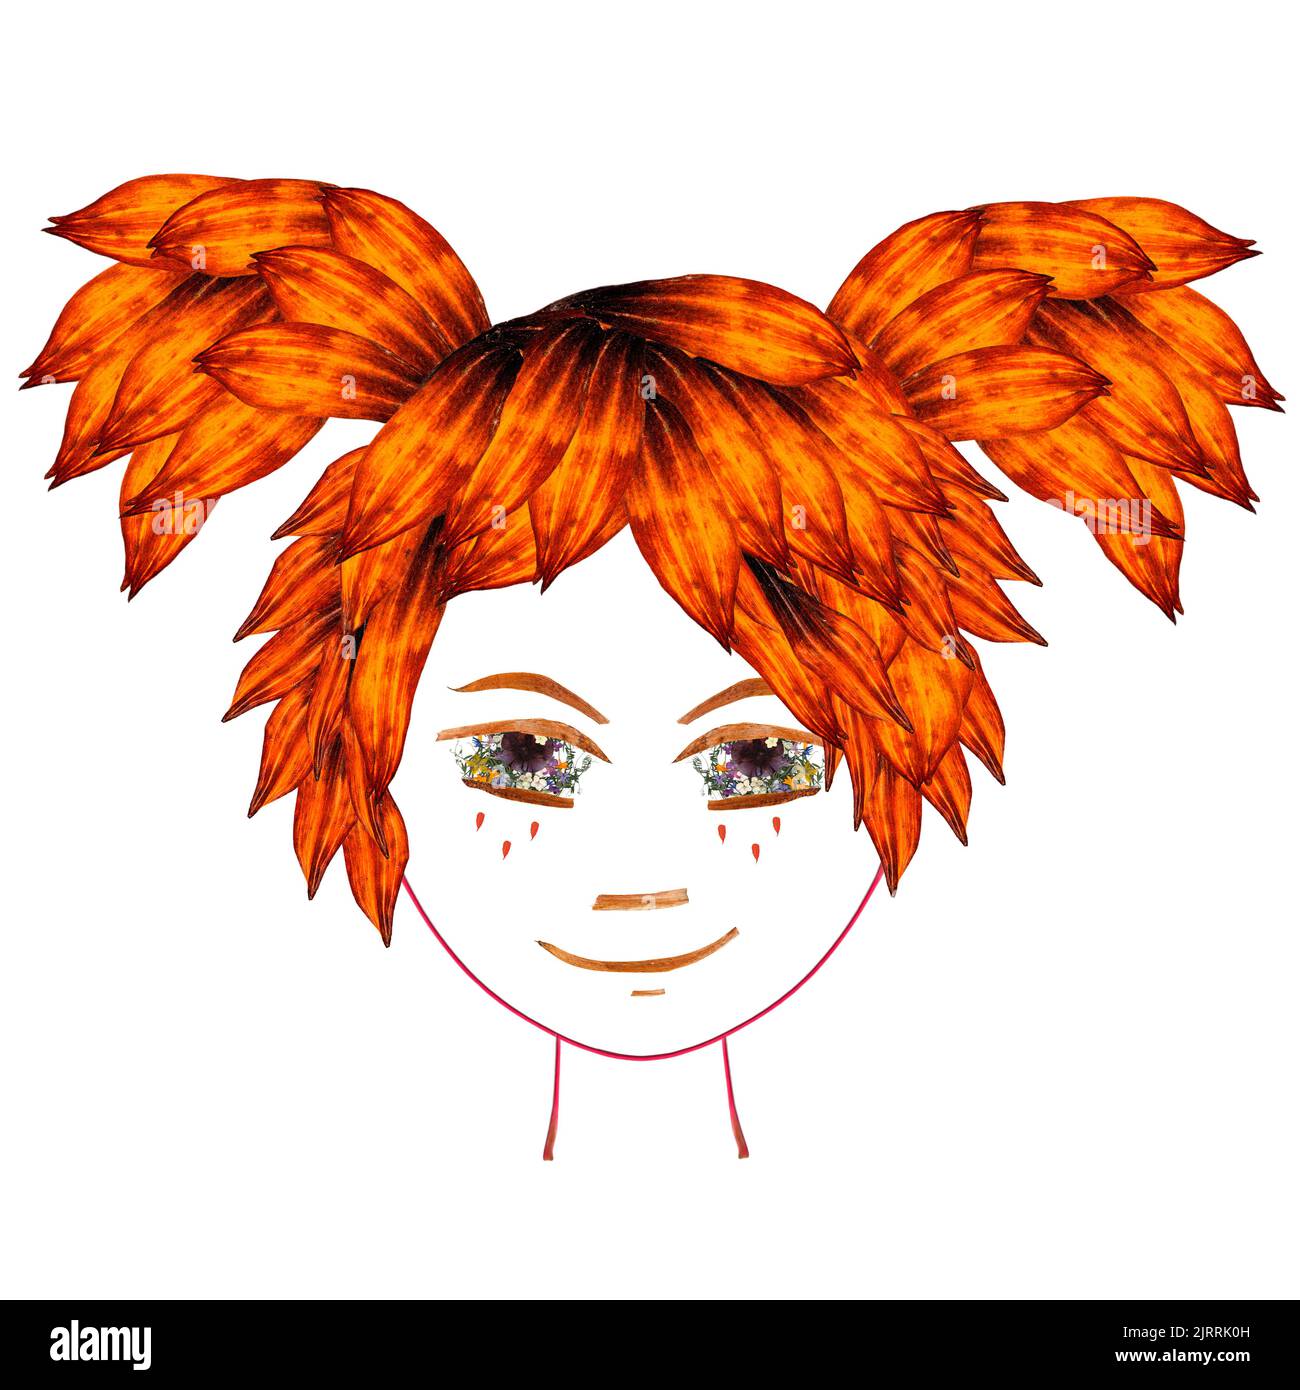 Application, face made of dried pressing multicolor Columbine flowers, long stiff brown iris. Girl with orange hair tails sticking out in different di Stock Photo